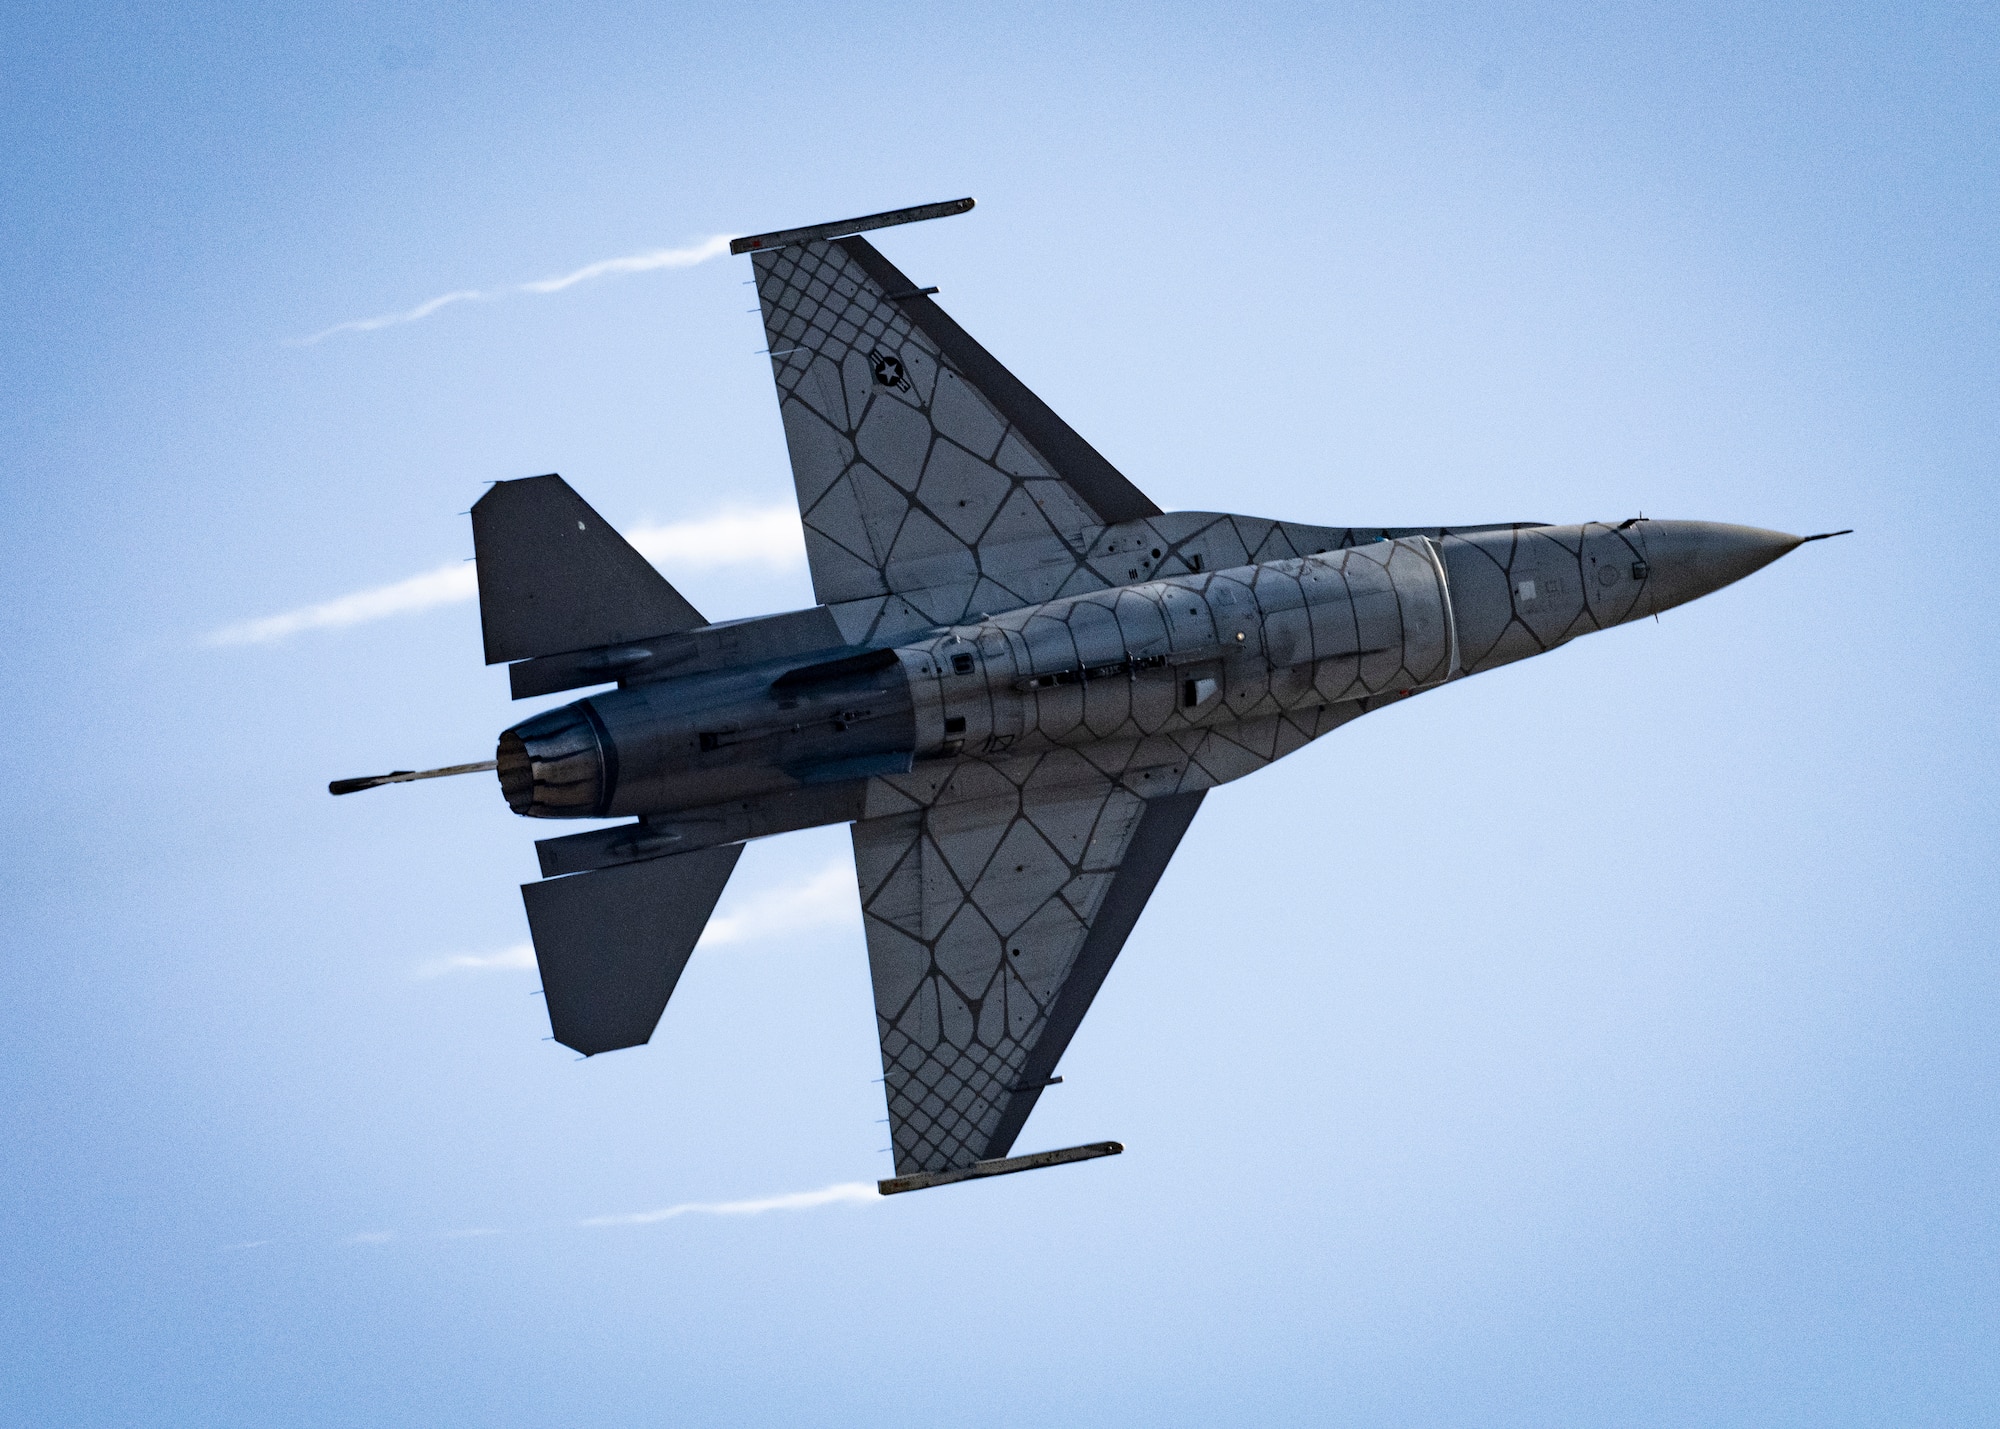 A pilot assigned to the F-16 Viper Demonstration Team performs a falcon turn during practice at Shaw Air Force Base, S.C., Jan. 26, 2022. The VDT plays a significant role in not only maintaining community relations for the Air Force, but also in recruiting future members of our service. (U.S. Air Force photo by Senior Airman Madeline Herzog)